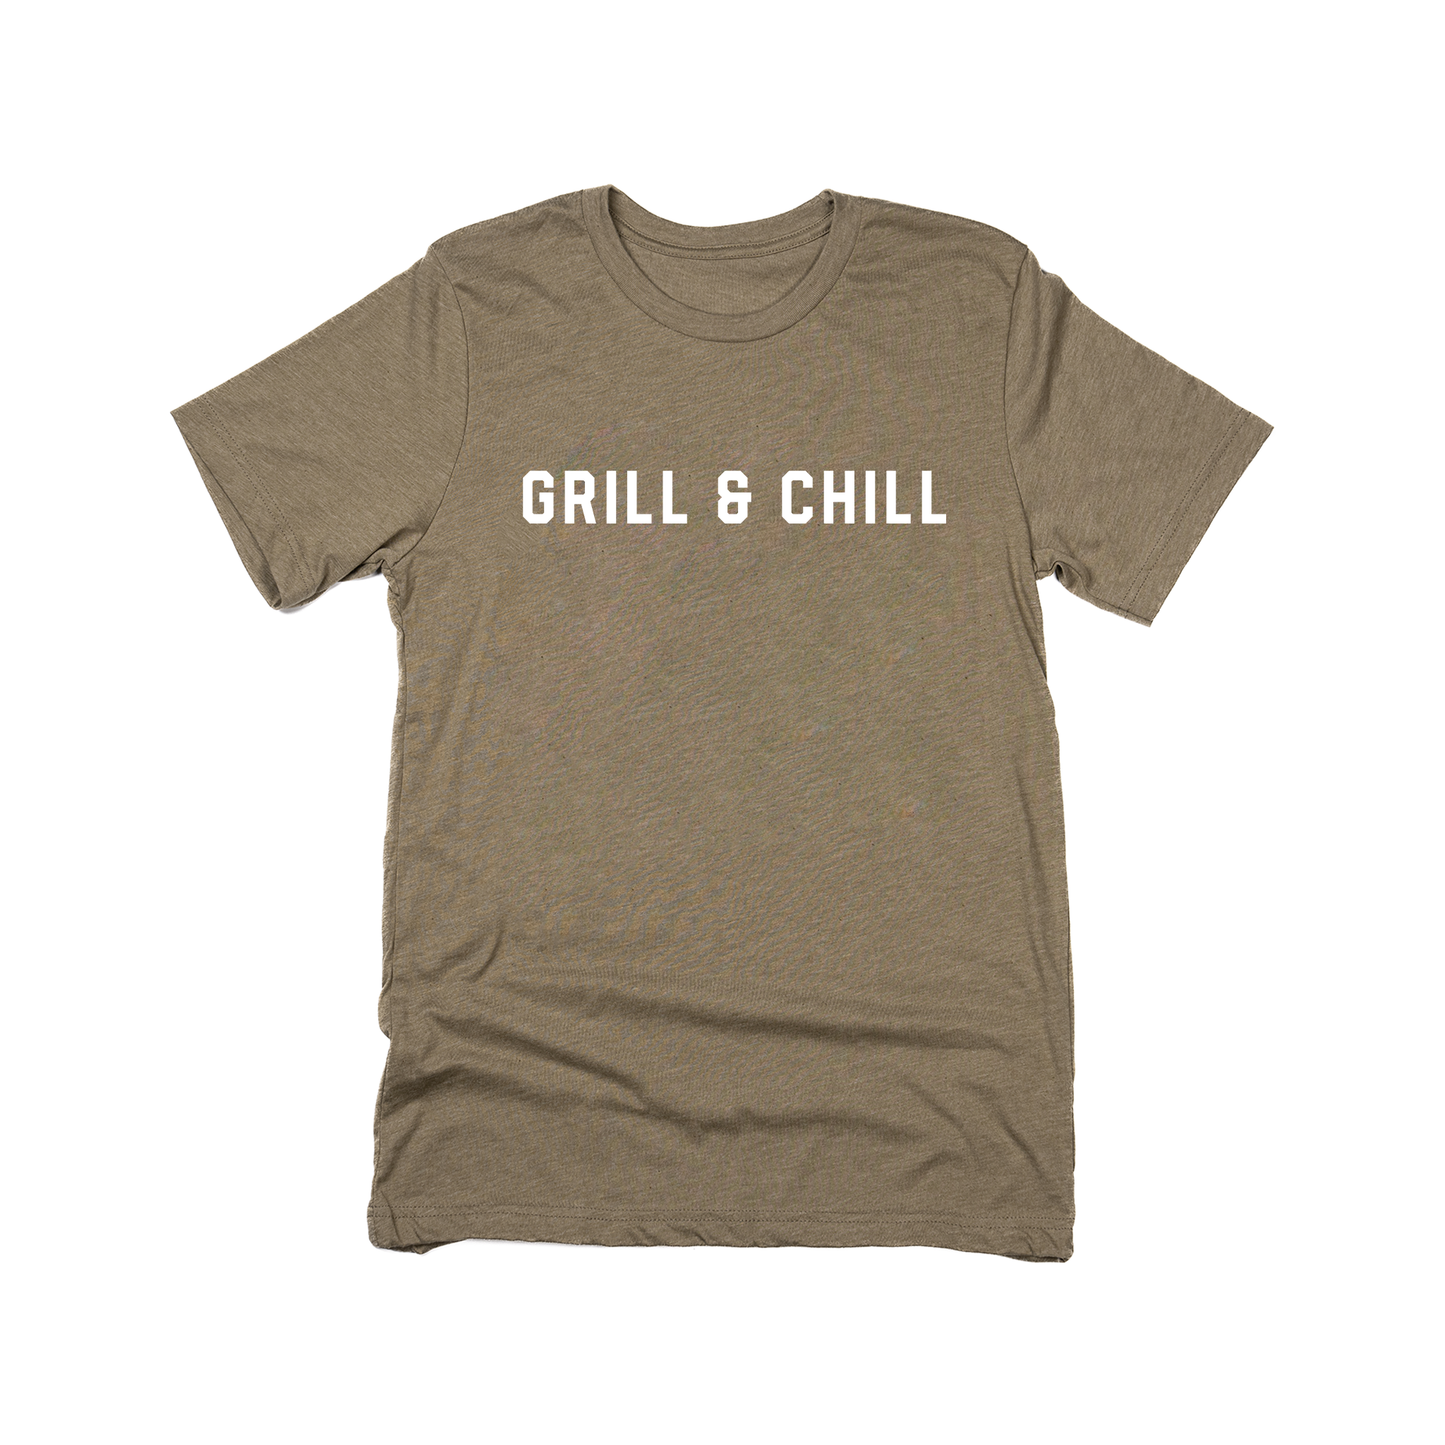 Grill & Chill (White) - Tee (Olive)